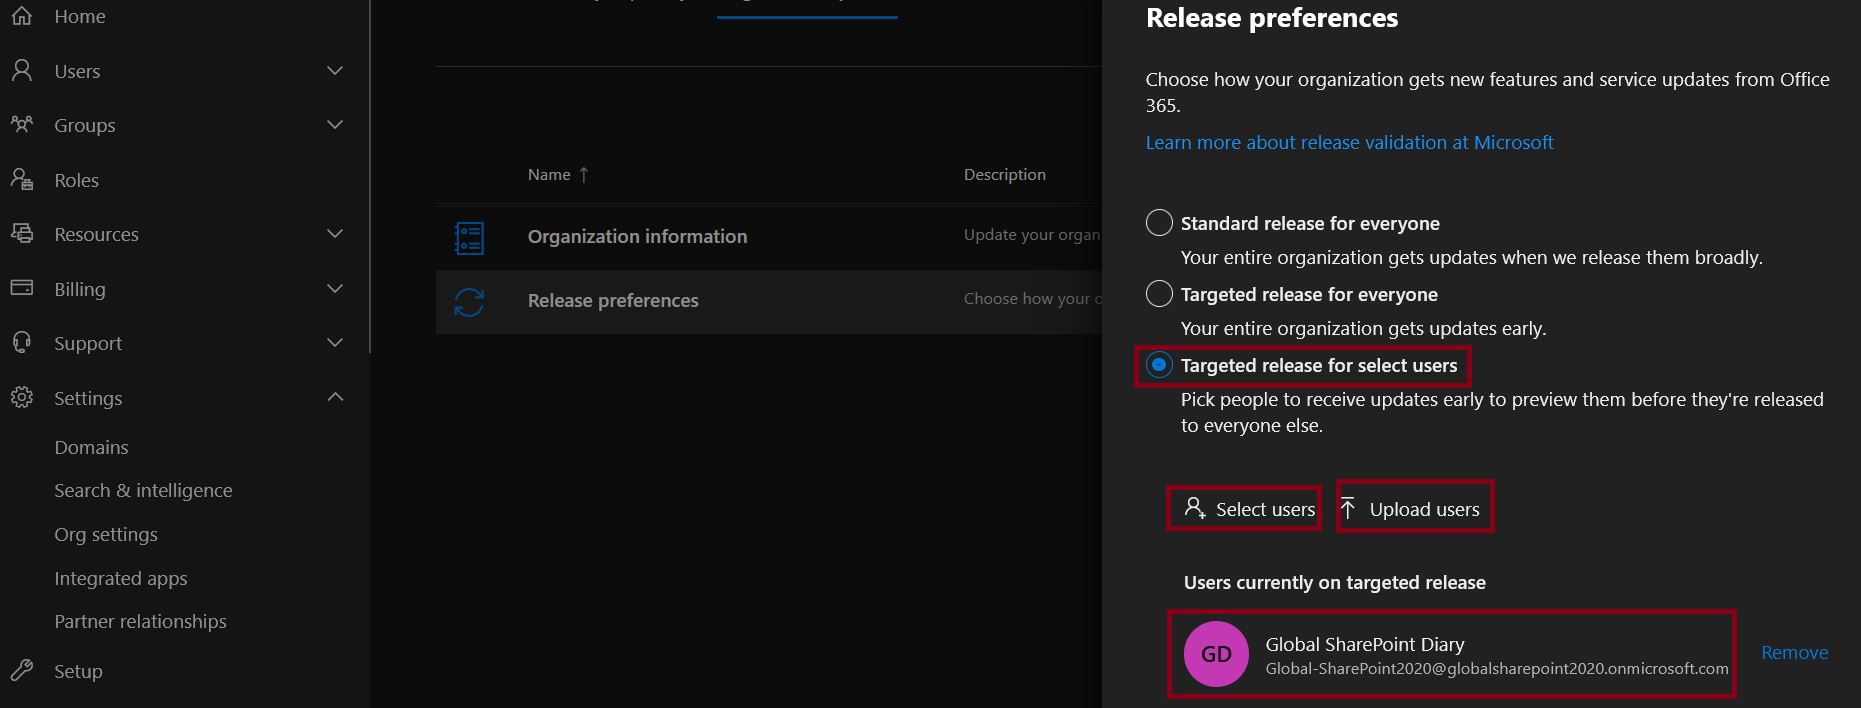 Release Preferences settings for targeted release for select users in Microsoft 365